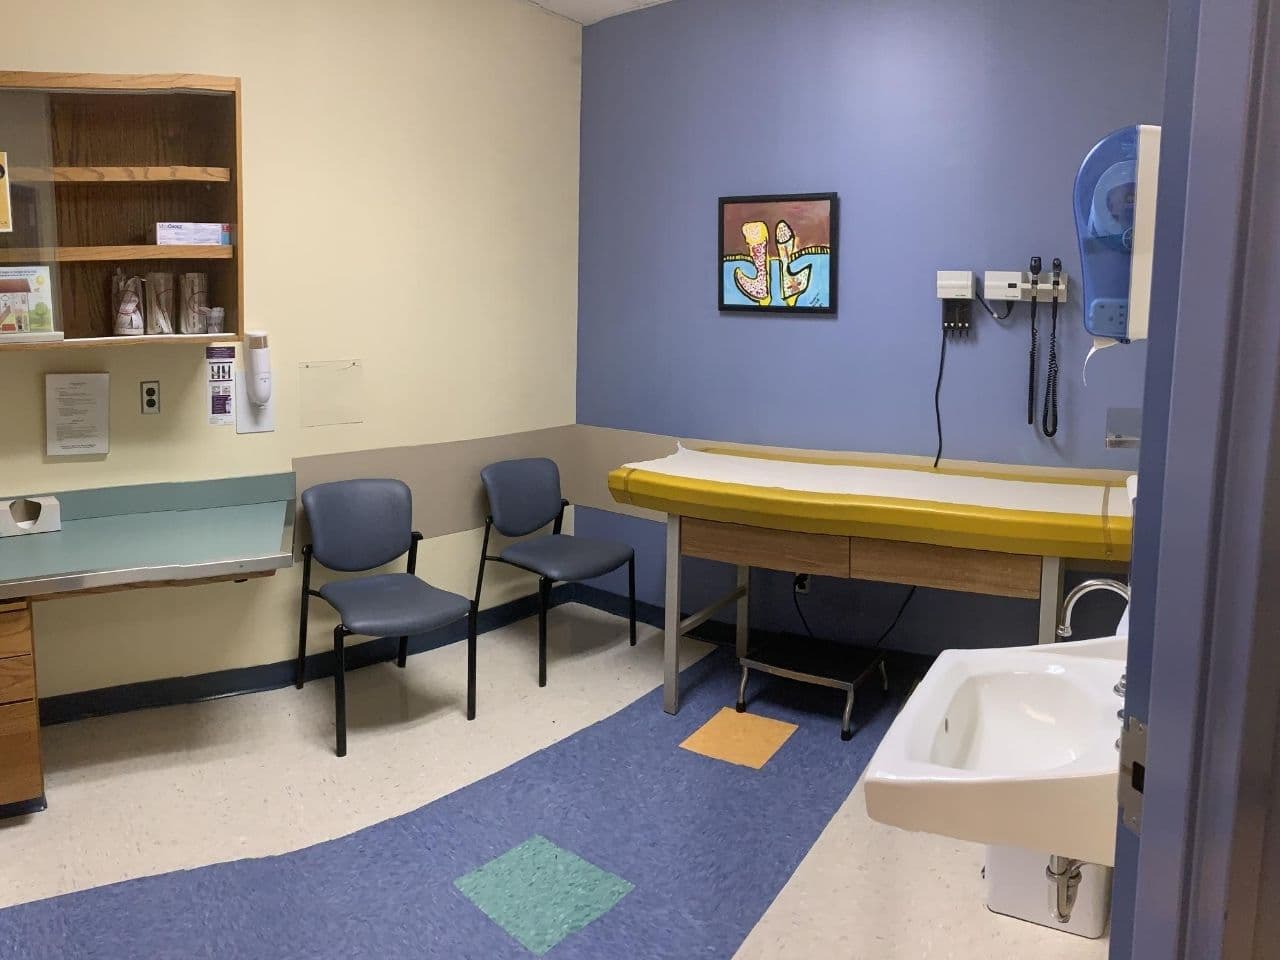 The exam room features a purple accent wall and a colorful painting along with exam table, sink, cabinets, and chairs.